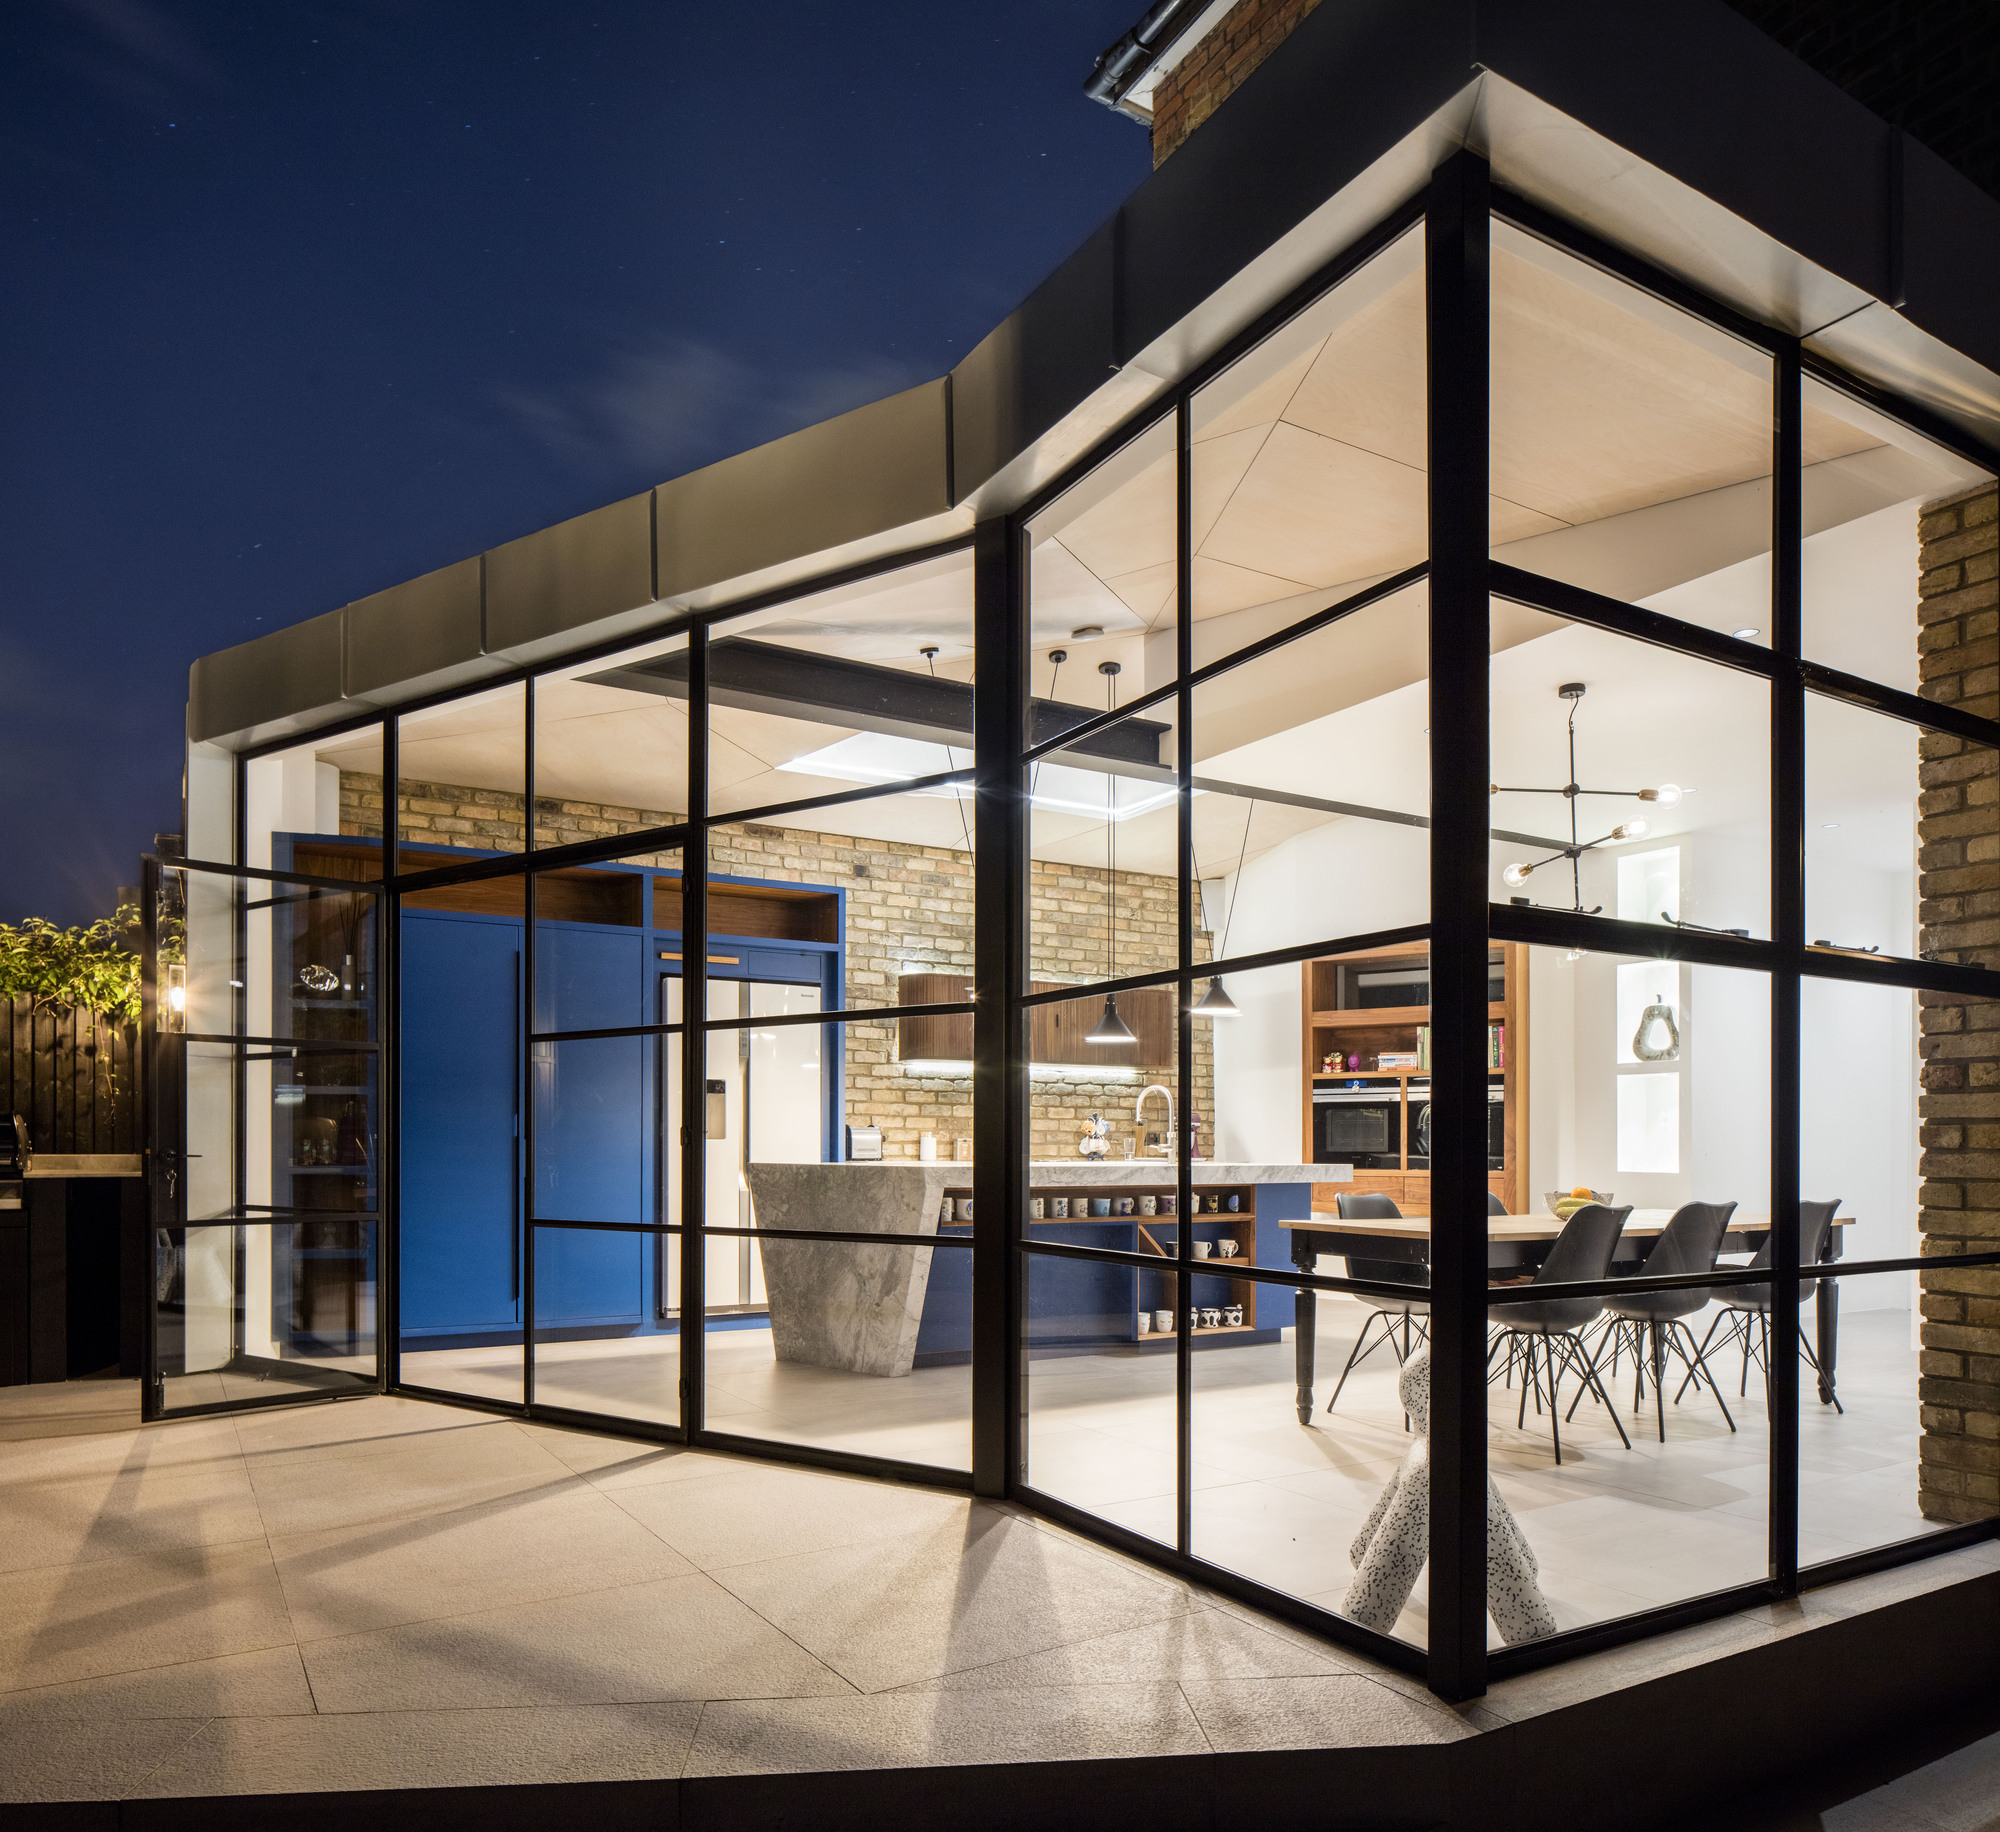 Angular roof design, zinc exterior and glass walls of the modern extension to Victorian home